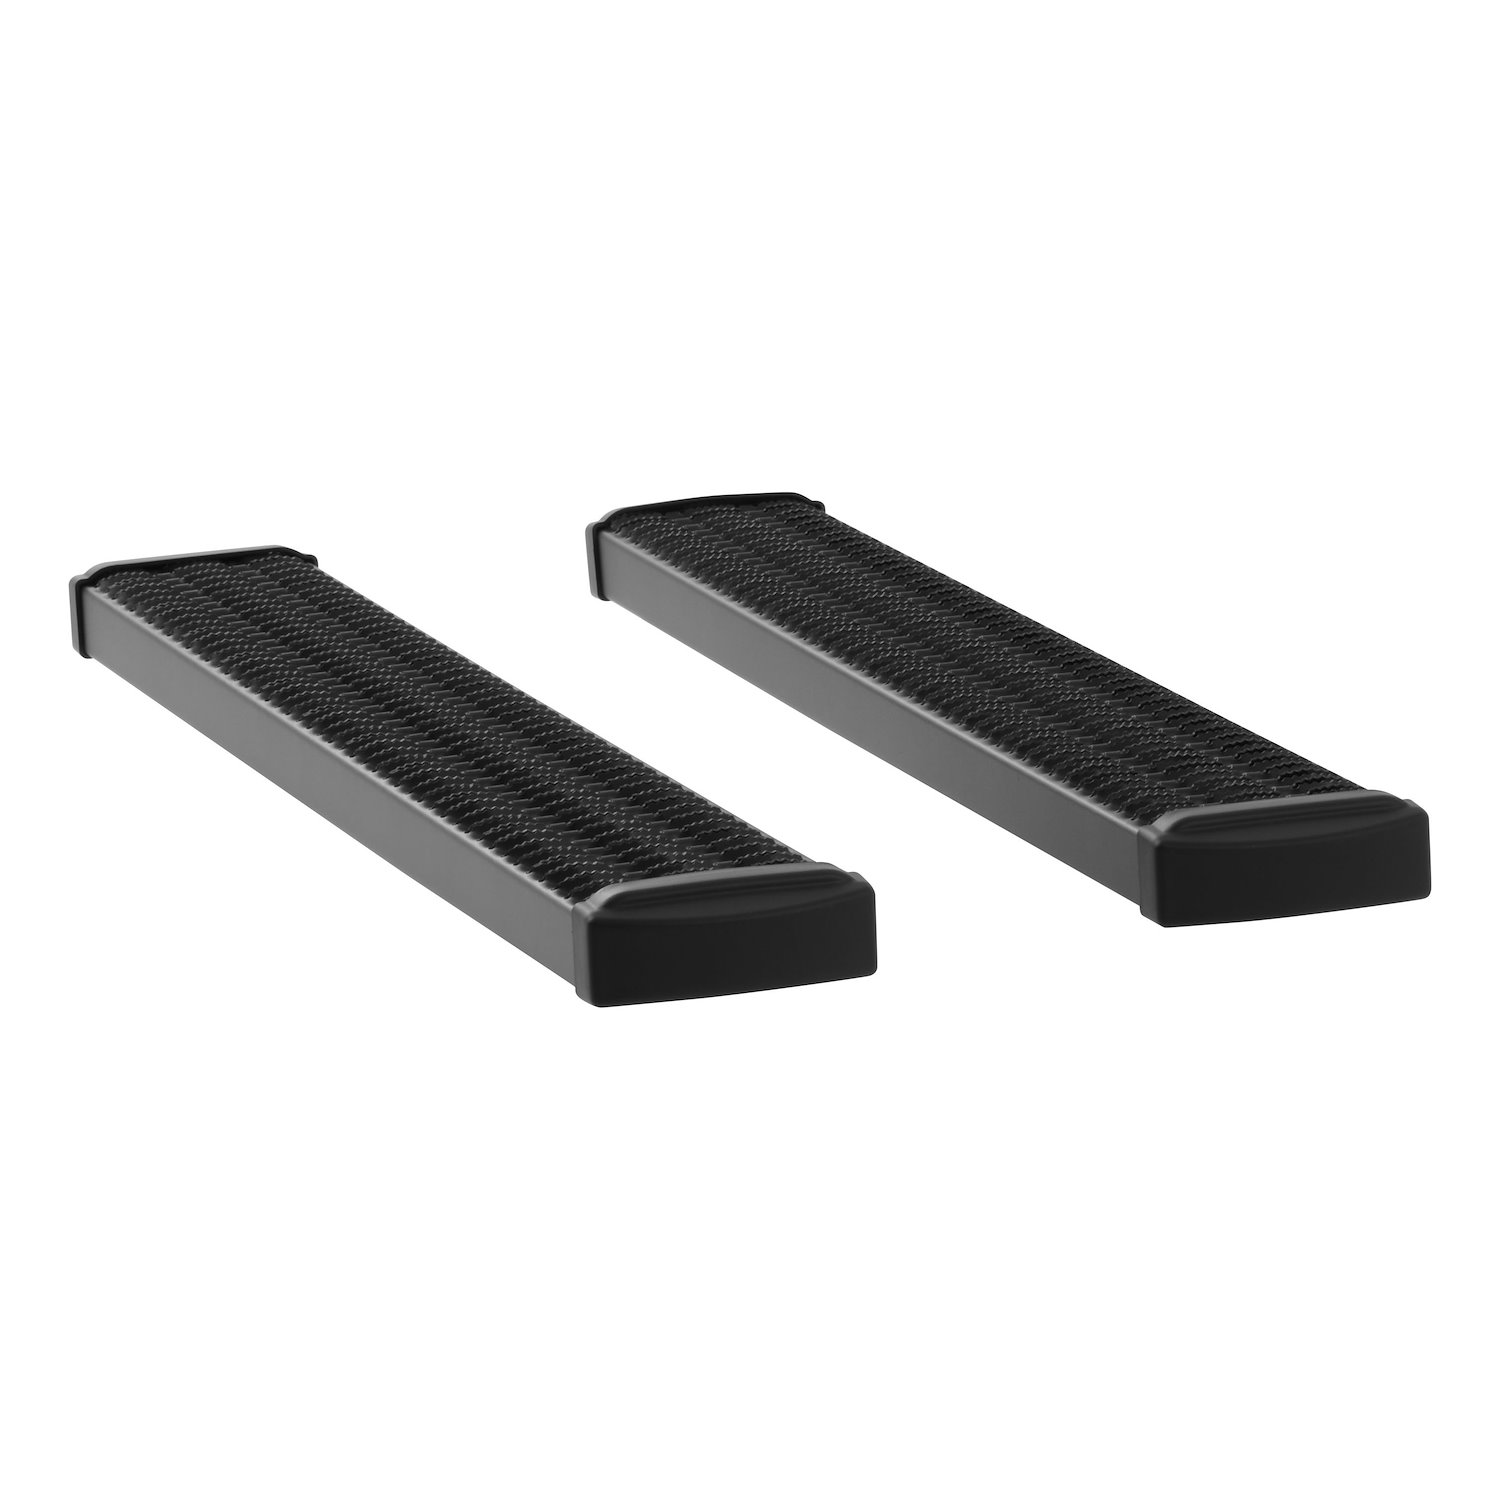 415054-409921 Grip Step 7 in. x 54 in. Black Aluminum Running Boards Fits Select Ford Super Duty